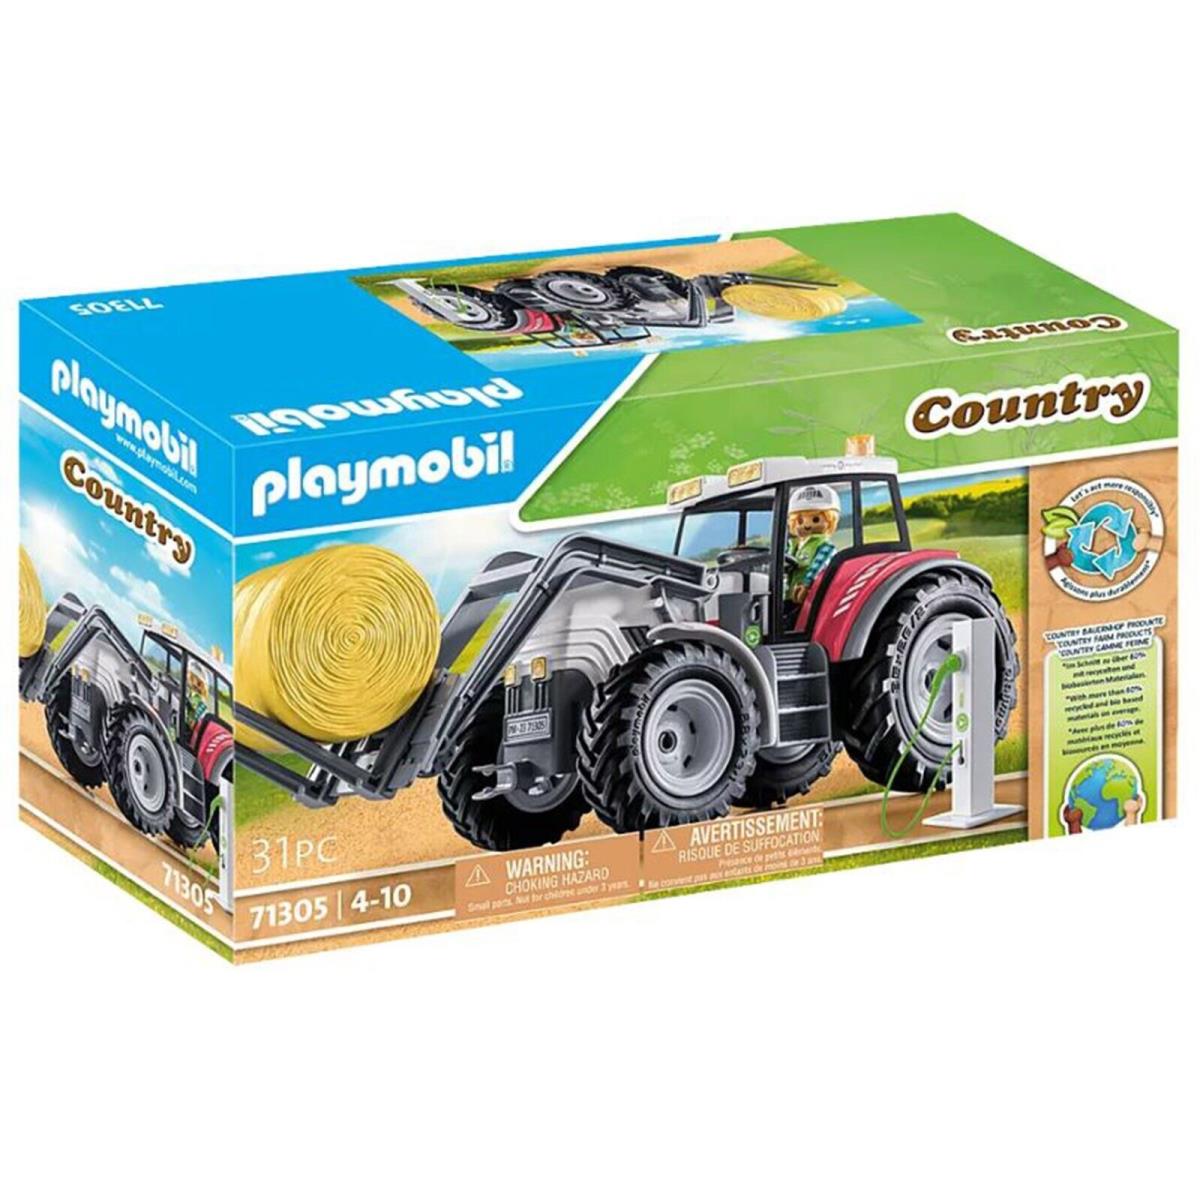 Playmobil Country Large Tractor with Accessories Building Set